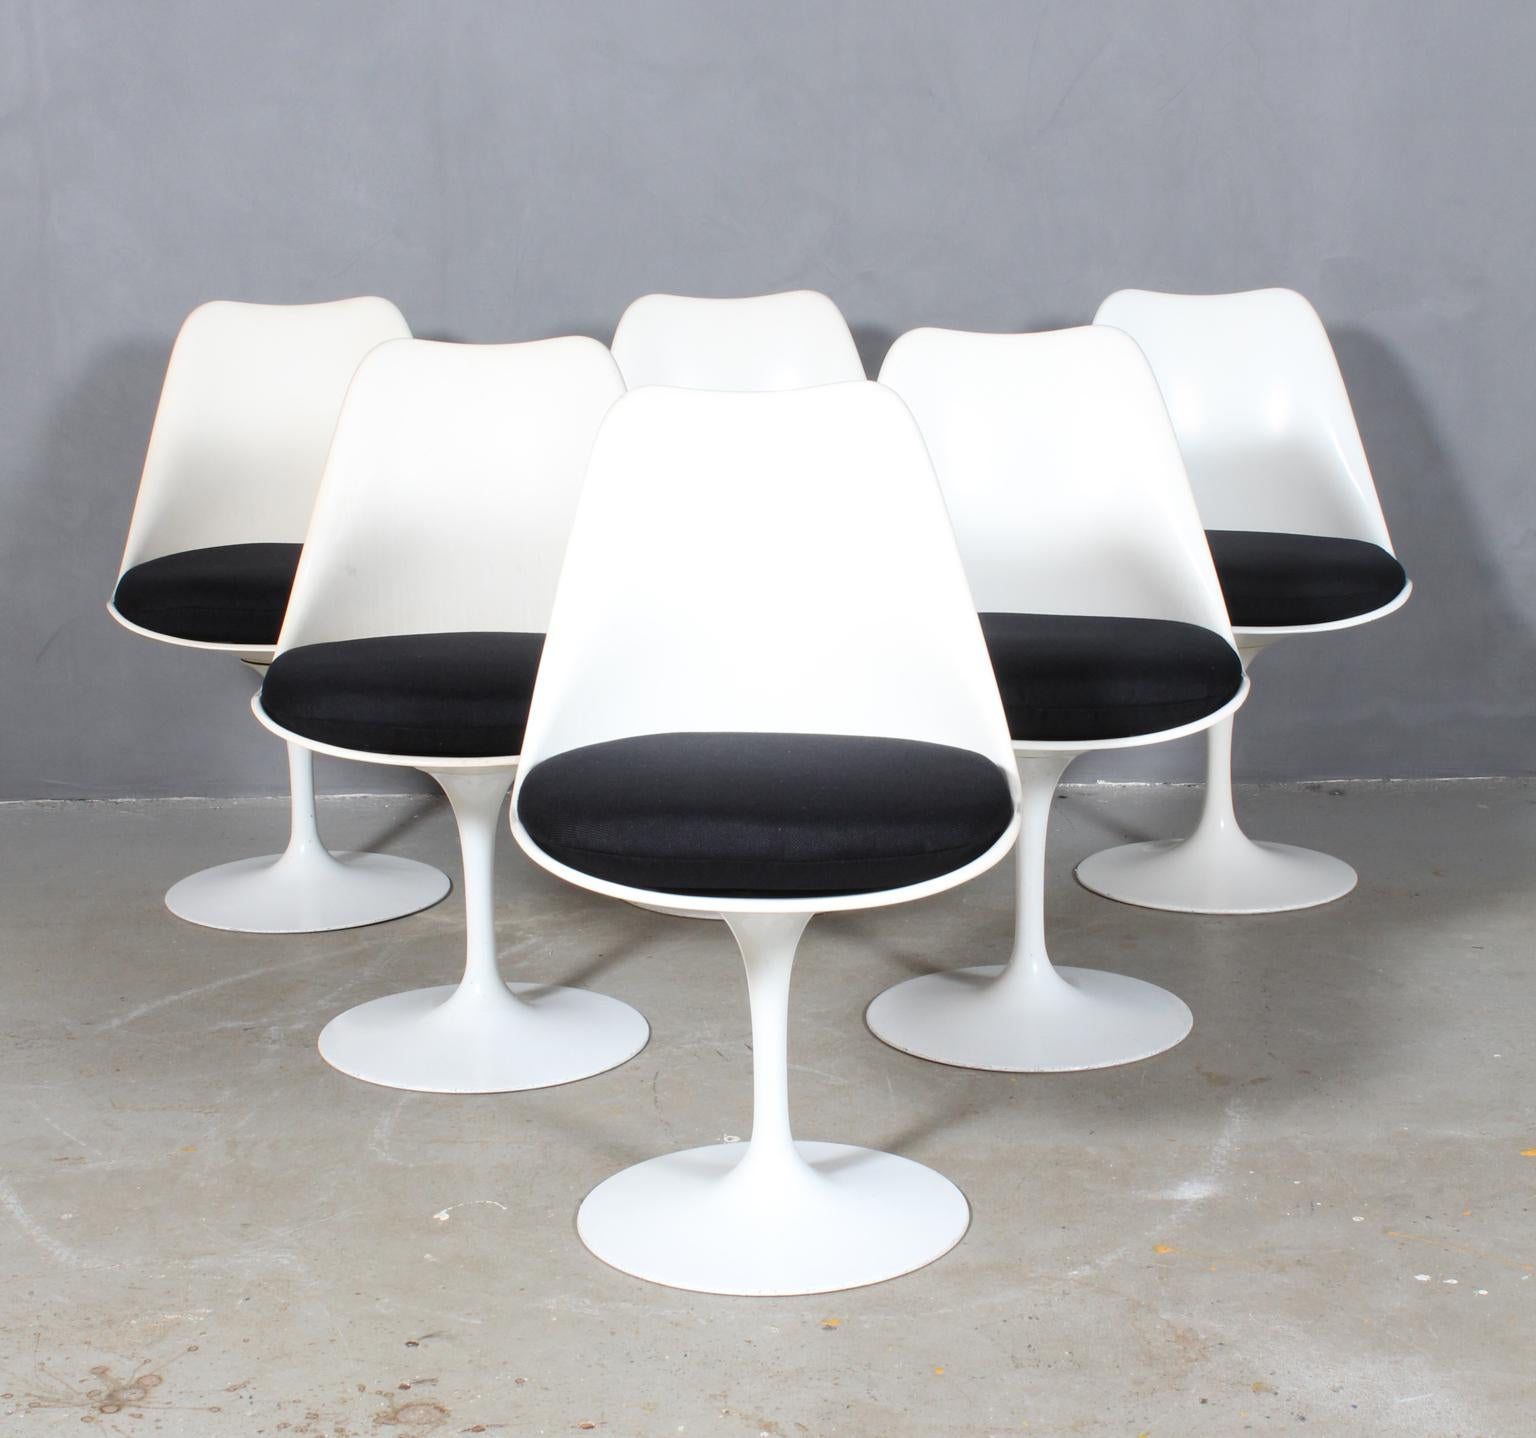 A set of six swiveling tulip chairs with new upholstered black fabric seat pads, perfect for that small eat in kitchen or cafe table manufactured by Knoll International.